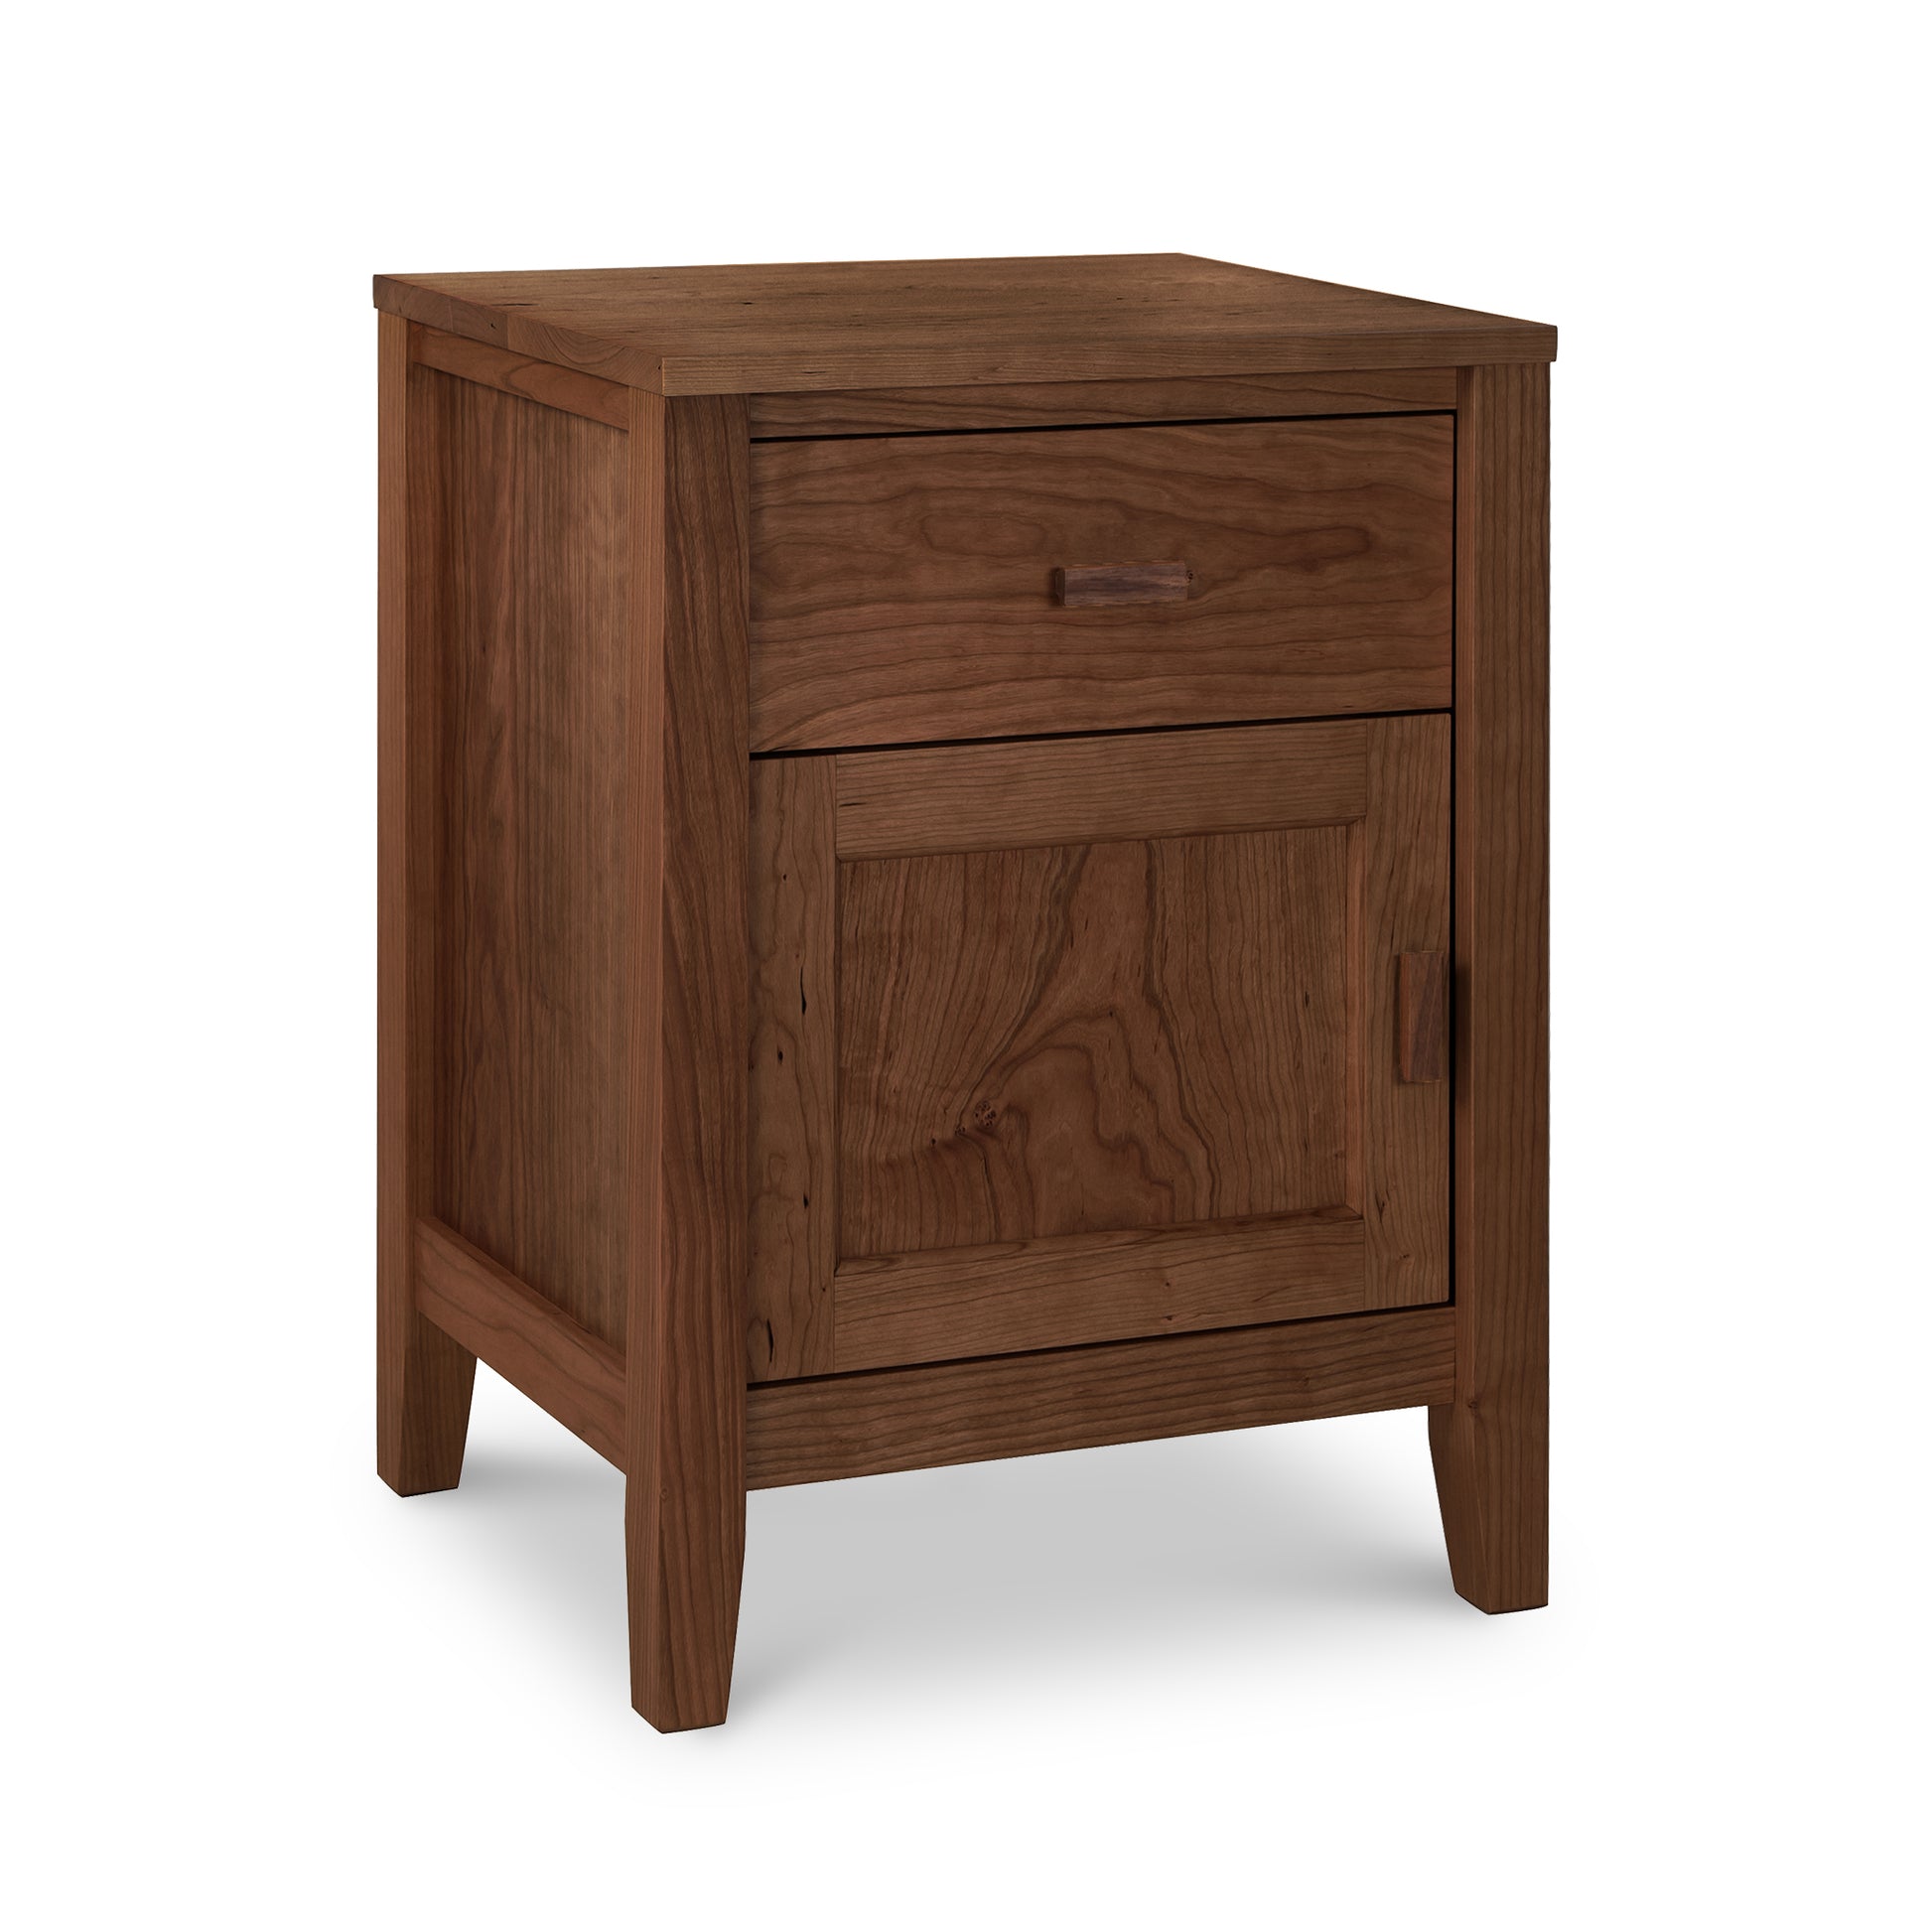 An Maple Corner Woodworks Andover Modern 1-Drawer Nightstand with Door crafted by Vermont woodworkers from sustainable hardwoods, featuring a smooth finish with a single drawer and a cabinet door, set against a plain white background.